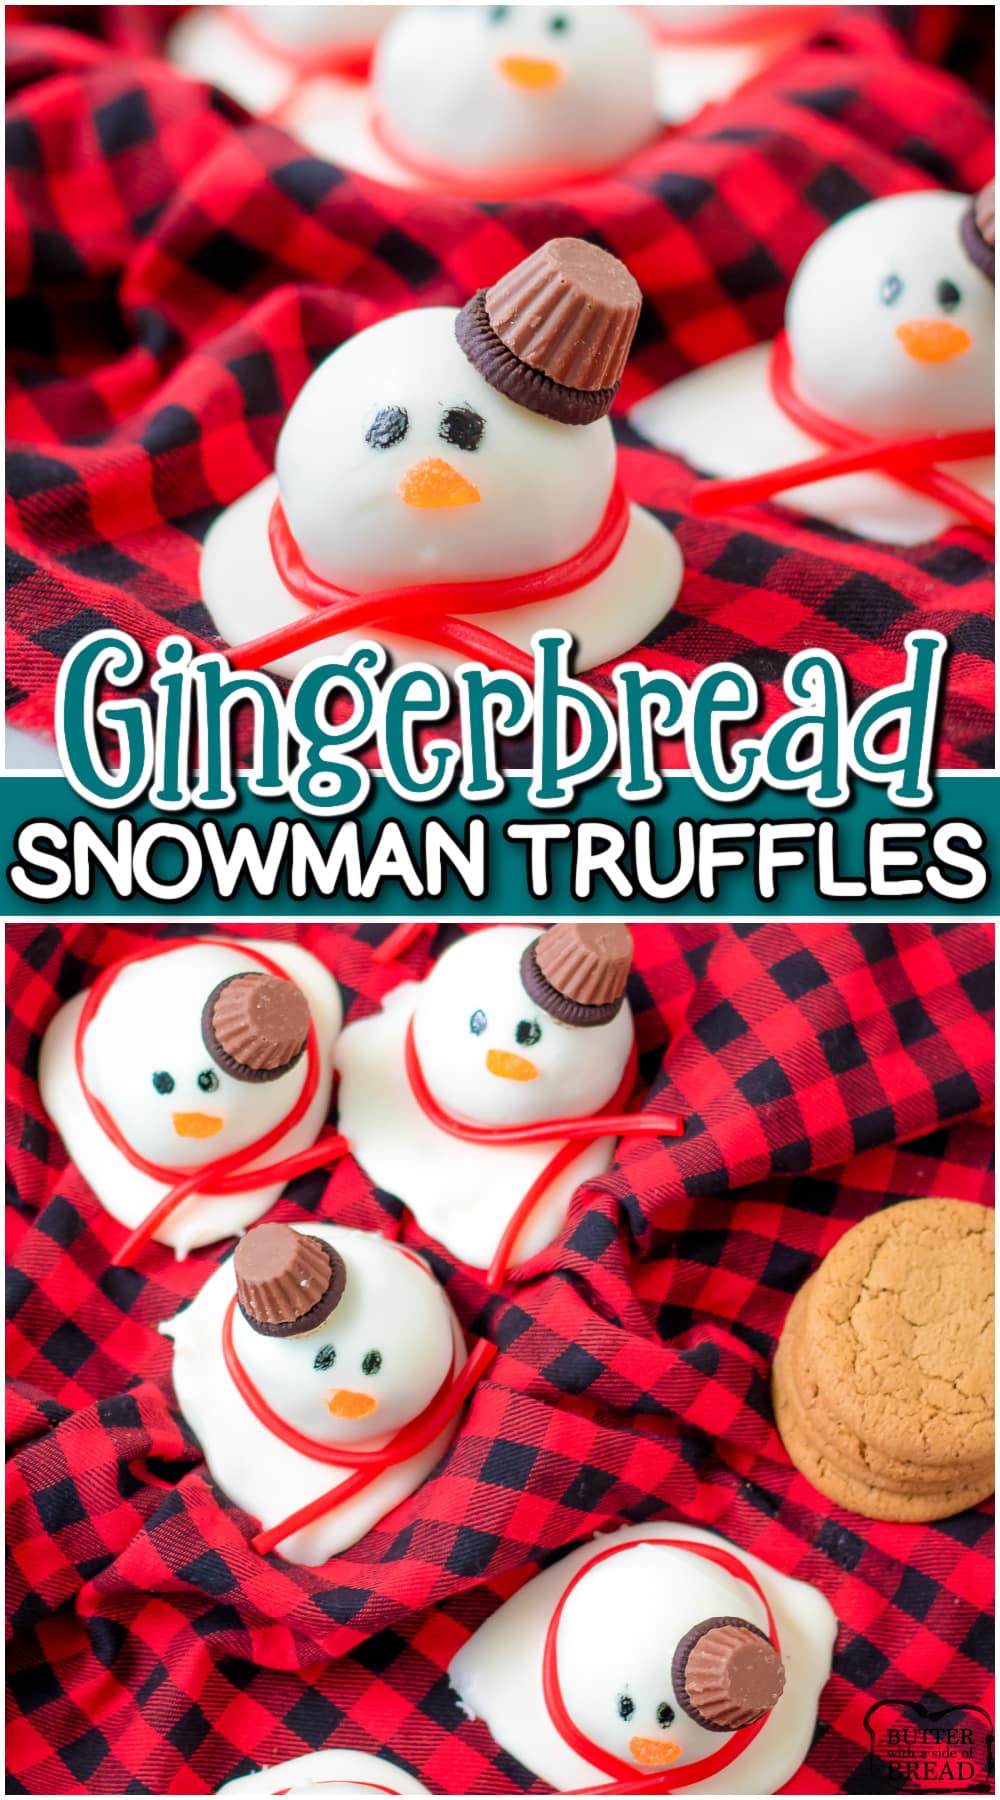 Gingerbread snowman truffles are simple, no bake holiday treats perfect for cookie trays! Crushed gingersnaps mixed with cream cheese, rolled & dipped in almond bark, then decorated like snowmen!